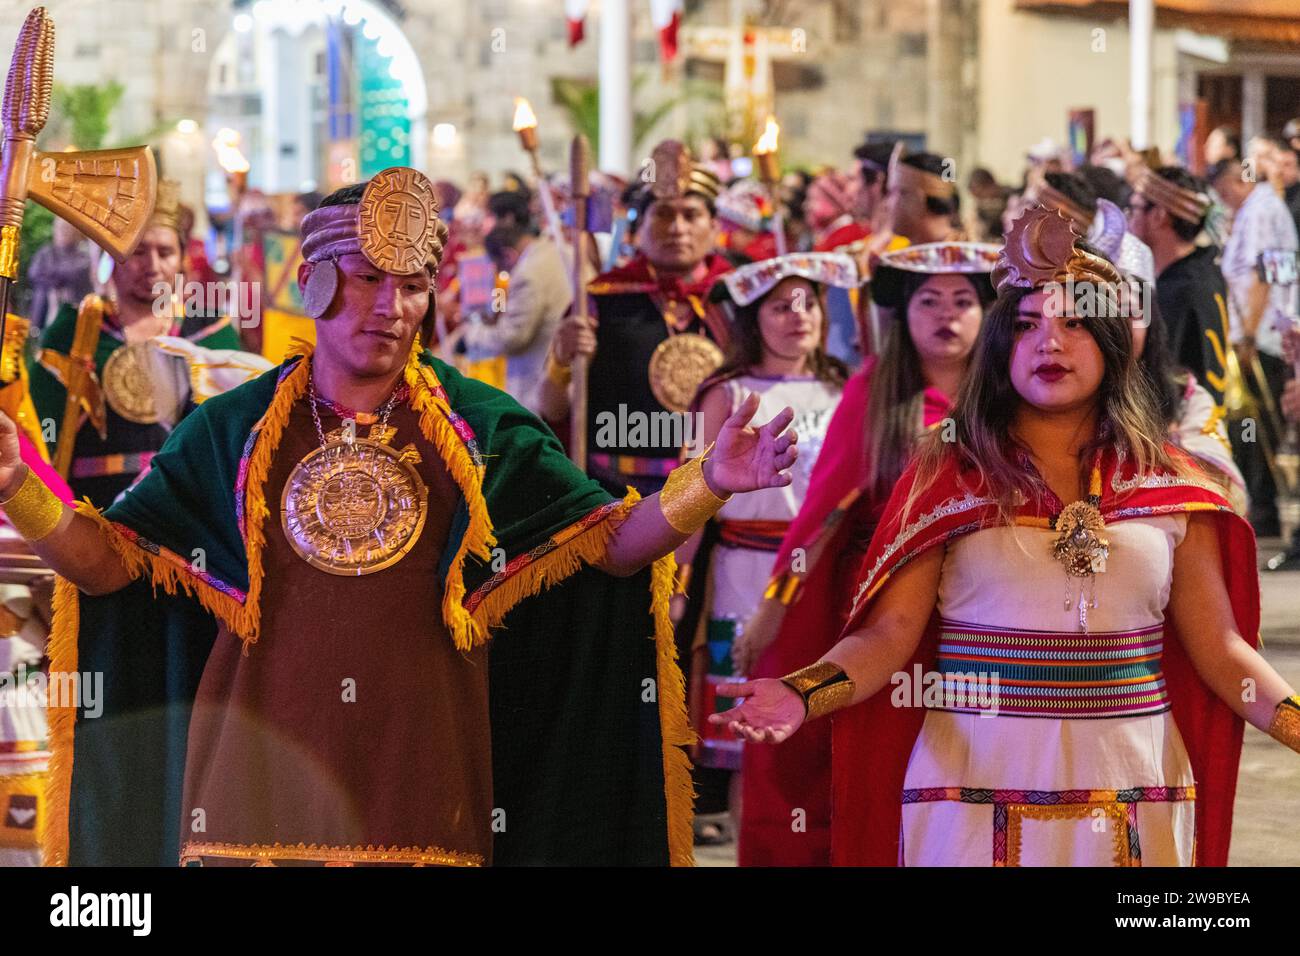 A ceremony procession in Aguas Calientes, Peru, celebrating the anniversary of Machu Picchu being declared a wonder of the world Stock Photo